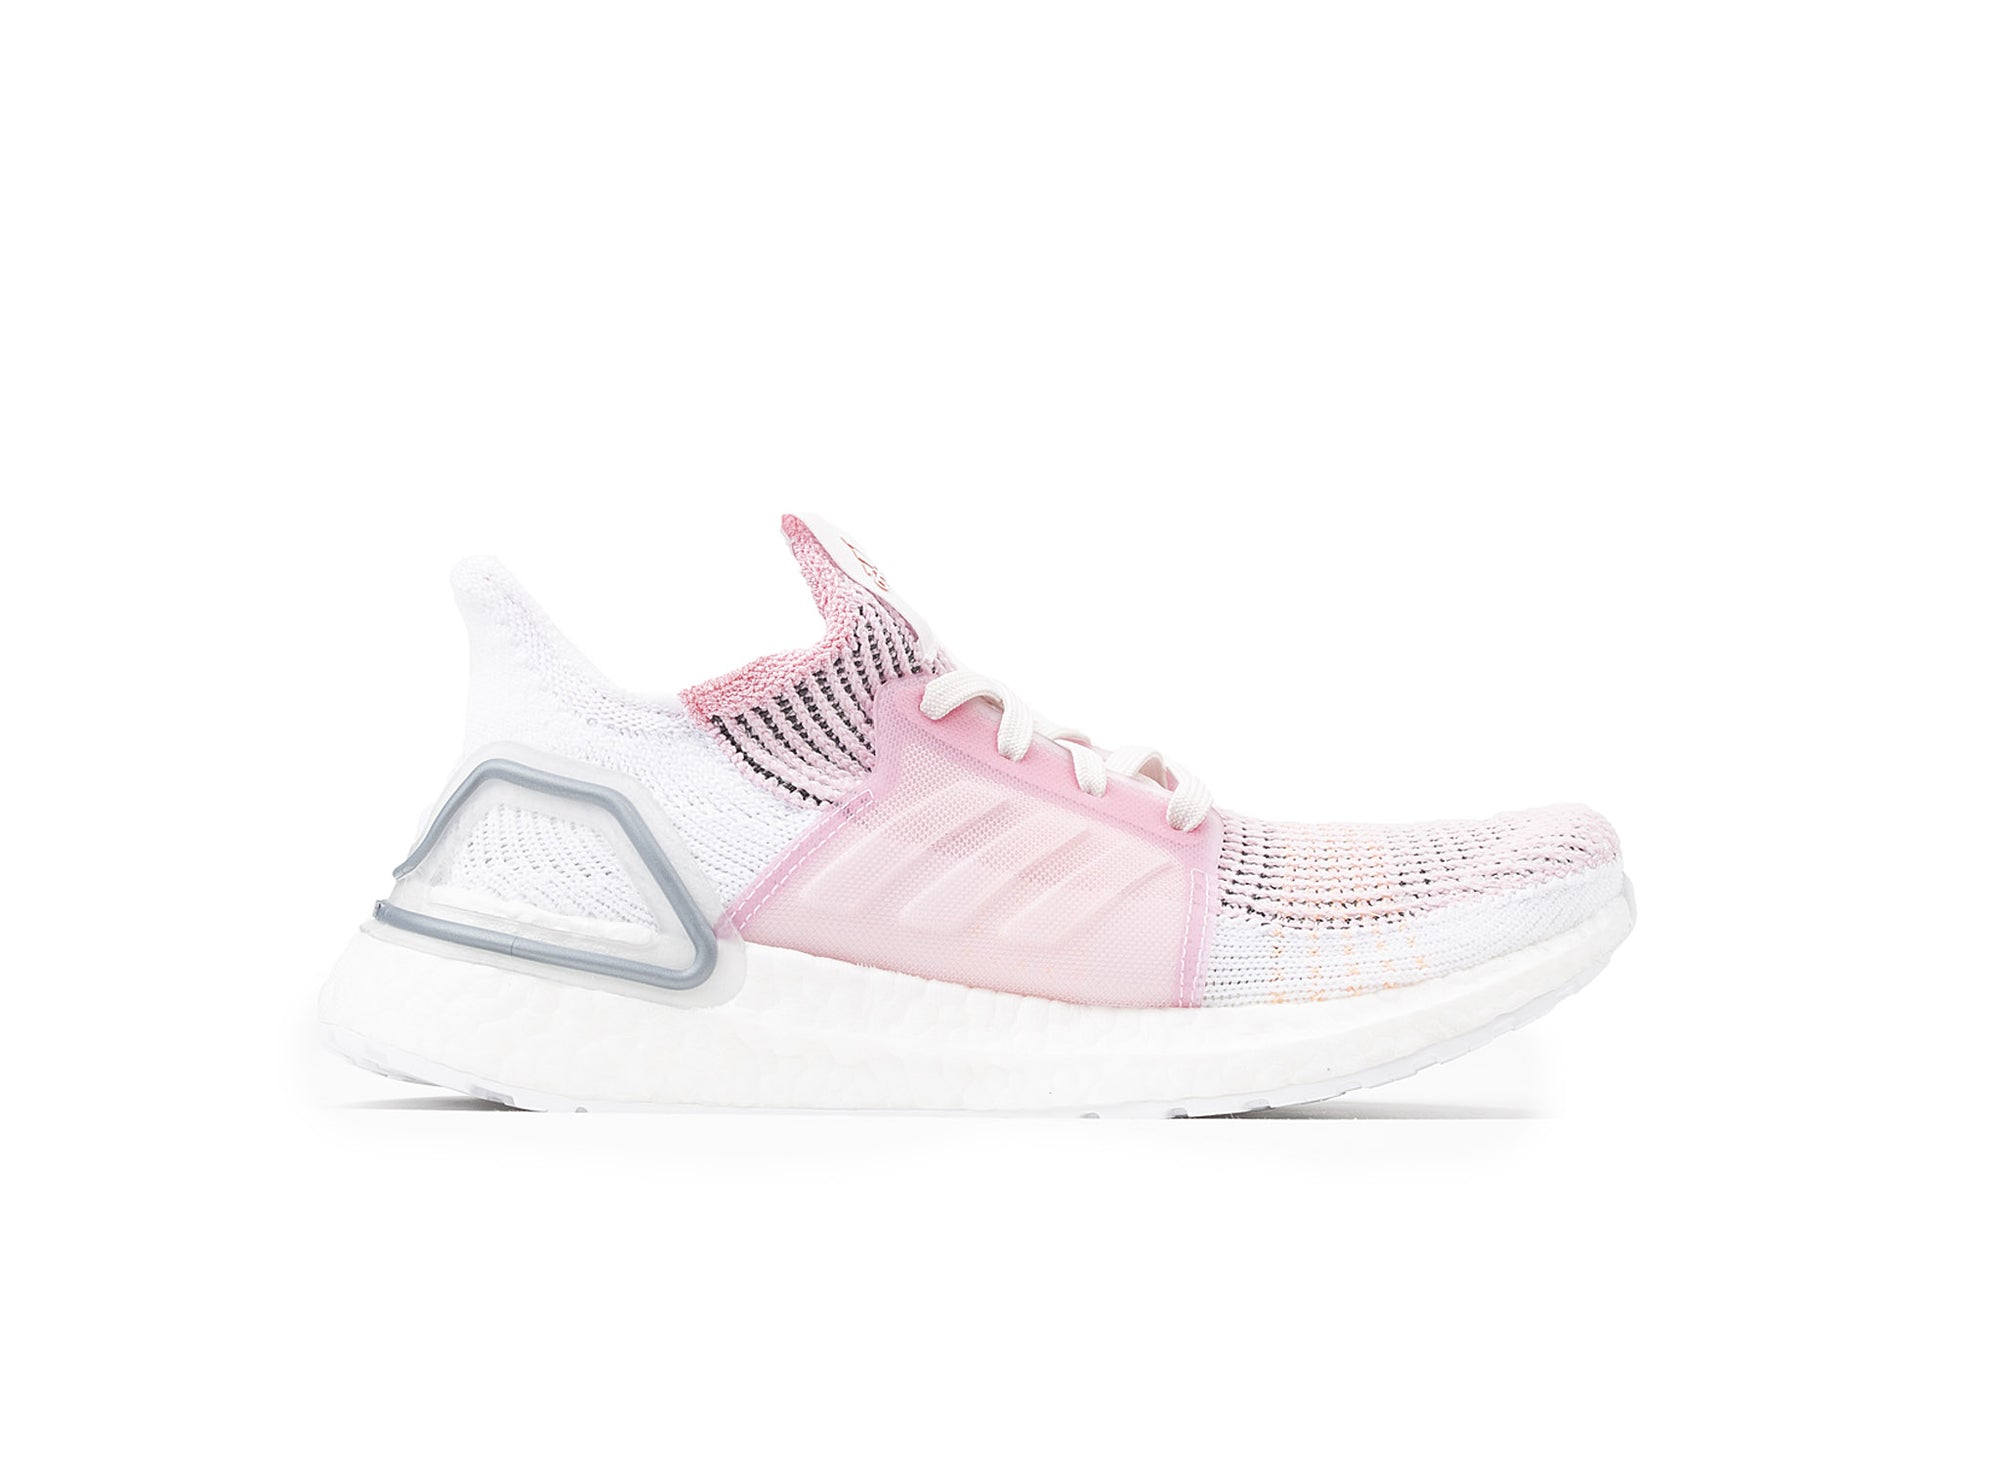 Adidas Ultra Boost Women Shop Clothing Shoes Online